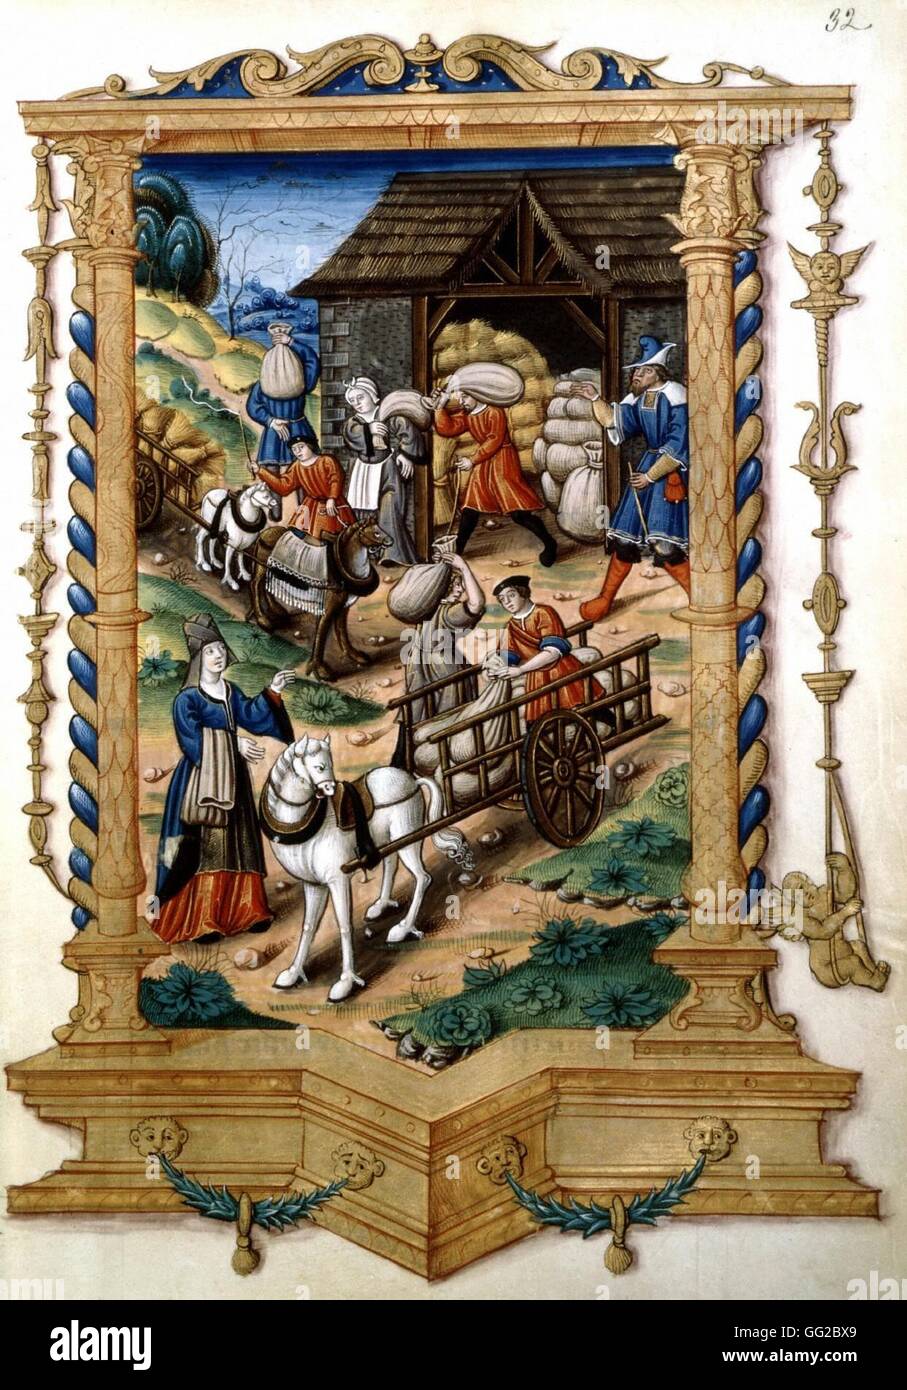 Royal Chants on the Crowned Conception from Le Puy de Rouen (1519-28). Scene of peasant life: carts bringing sheafs of wheat to the barn. Others coming out, filled with sacks of grain. 16th C France Paris. Bibliothèque Nationale Stock Photo